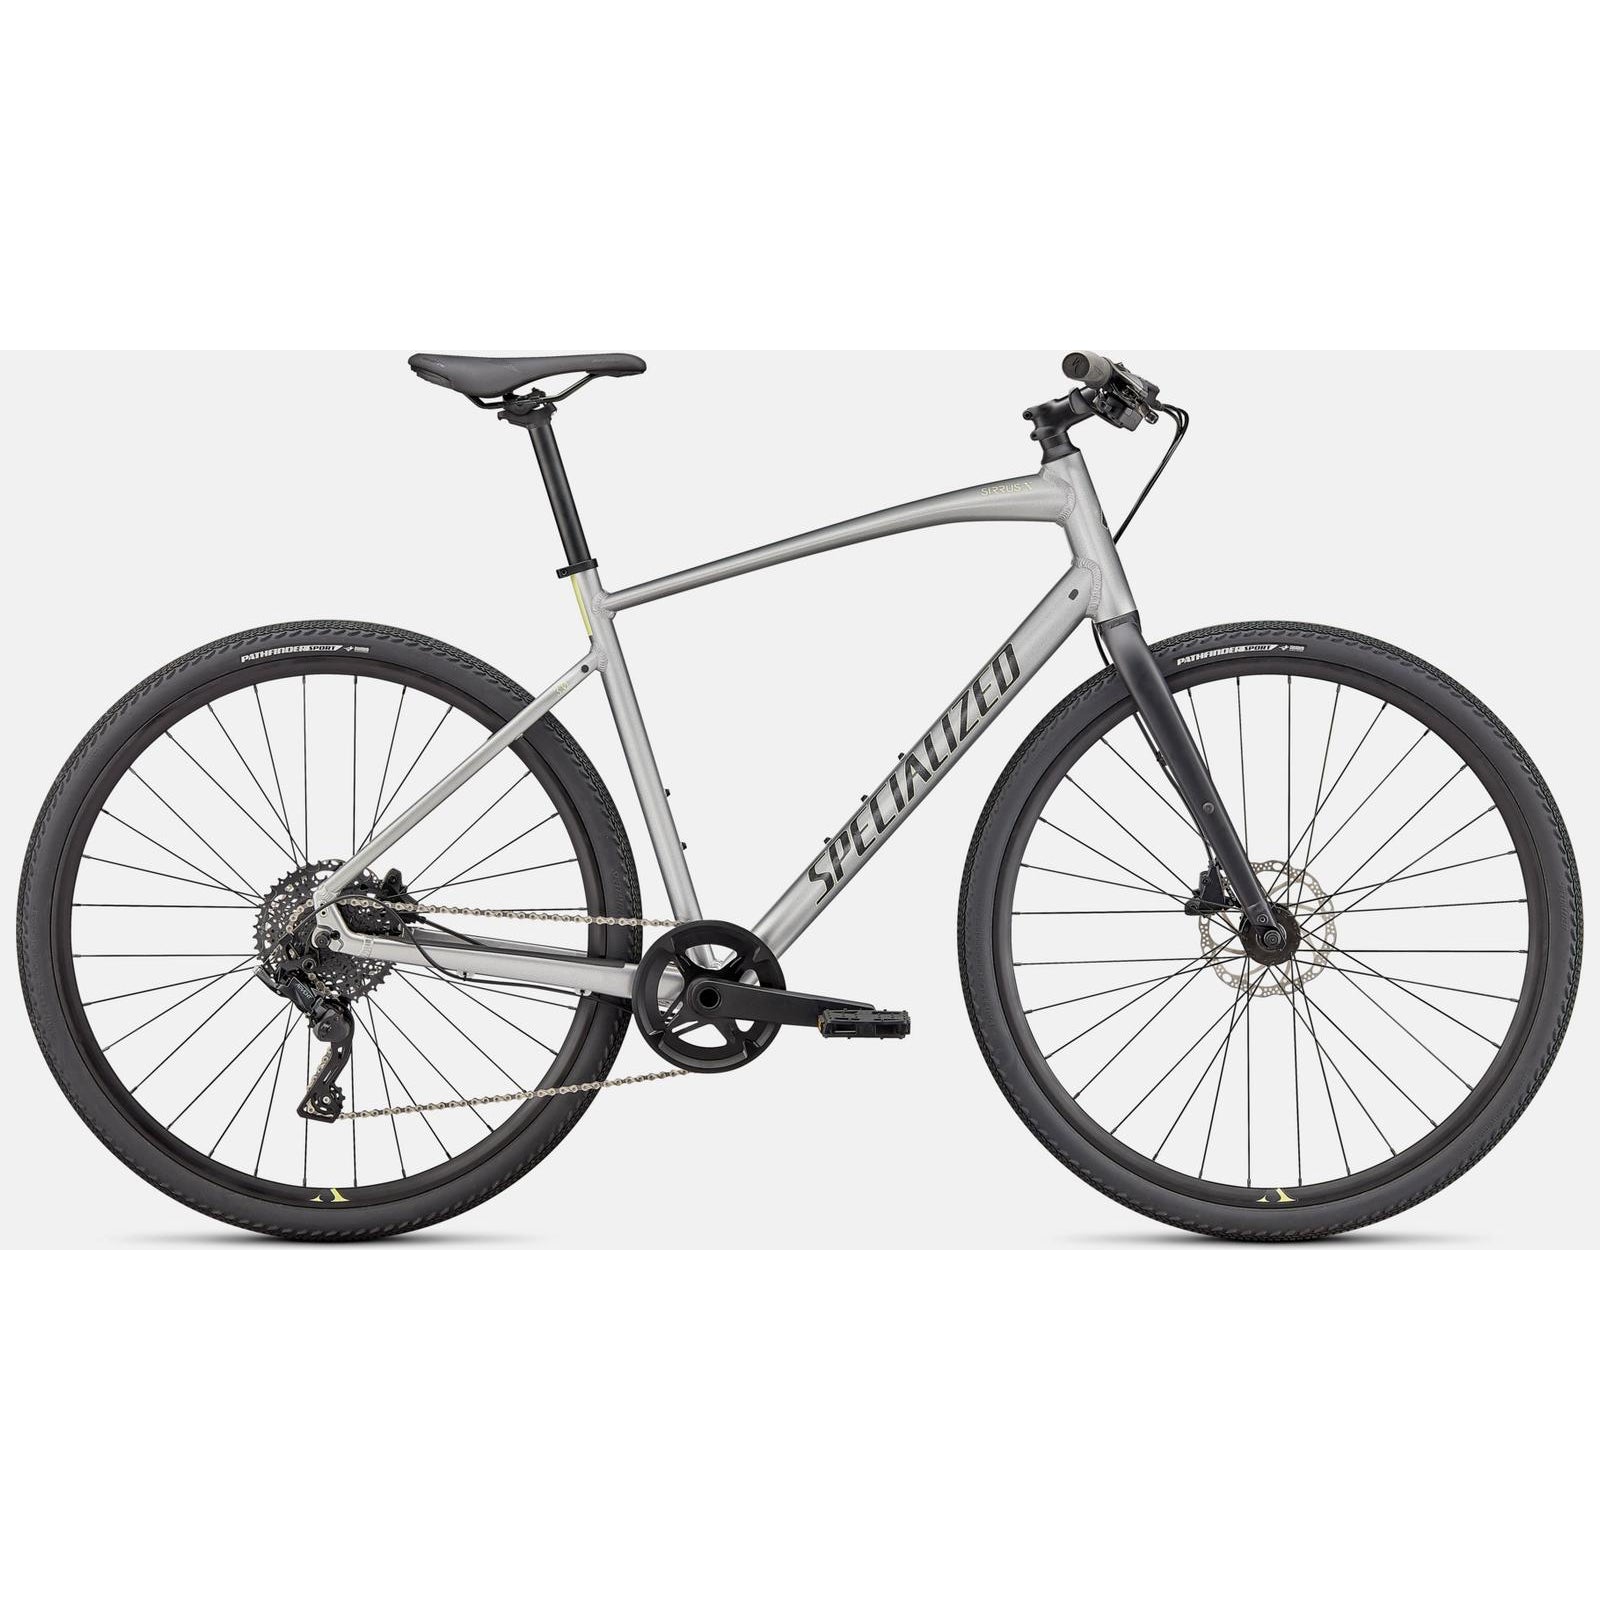 Specialized Sirrus X 3.0 Fitness Road Bike - Bikes - Bicycle Warehouse